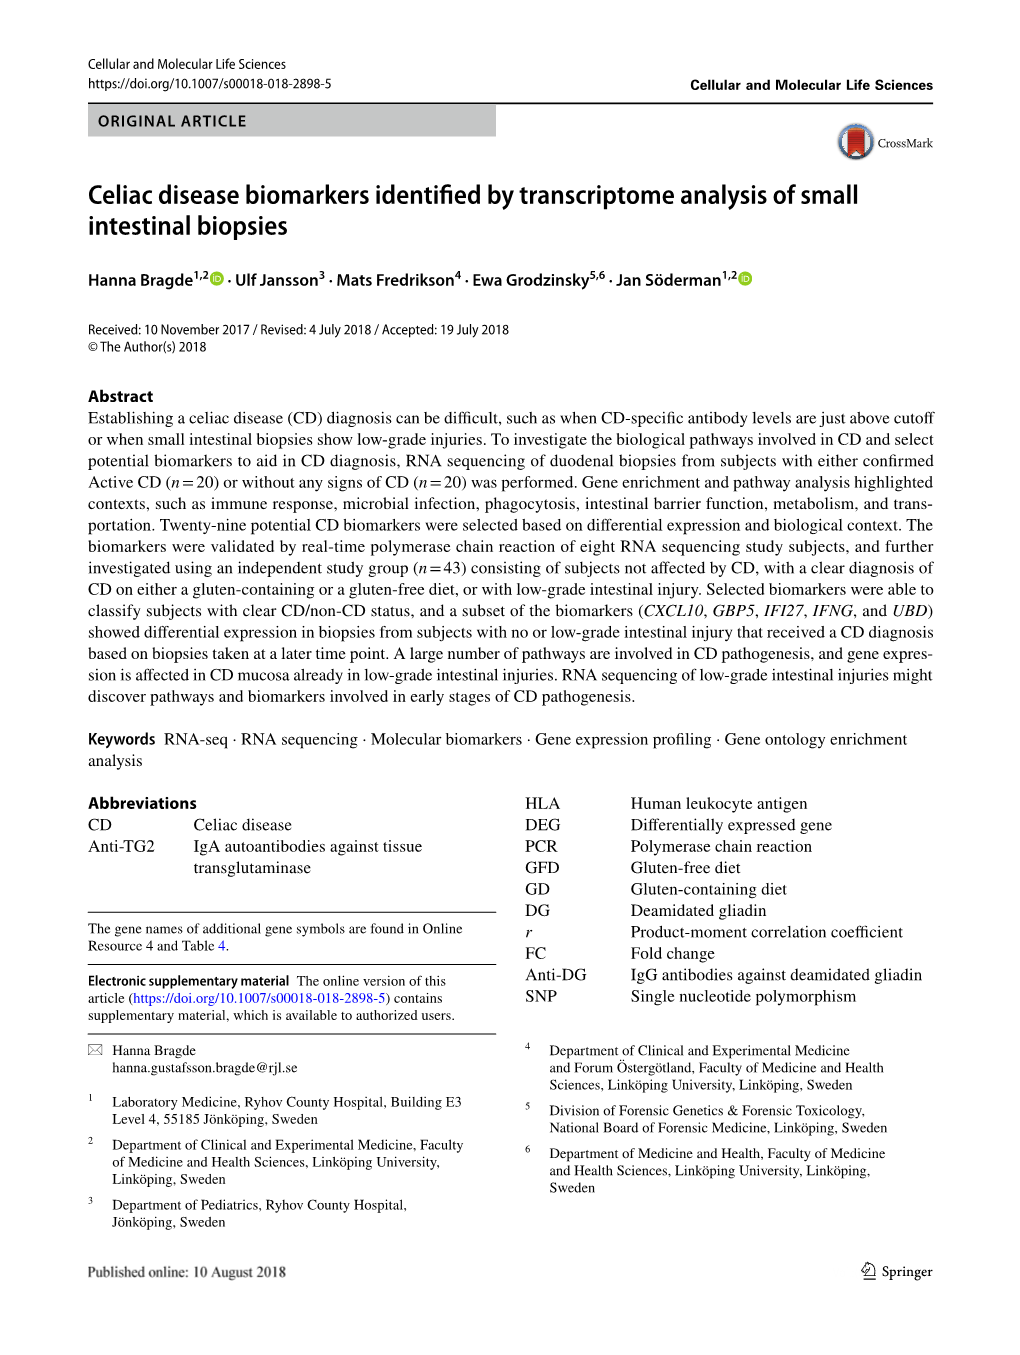 Celiac Disease Biomarkers Identified by Transcriptome Analysis of Small